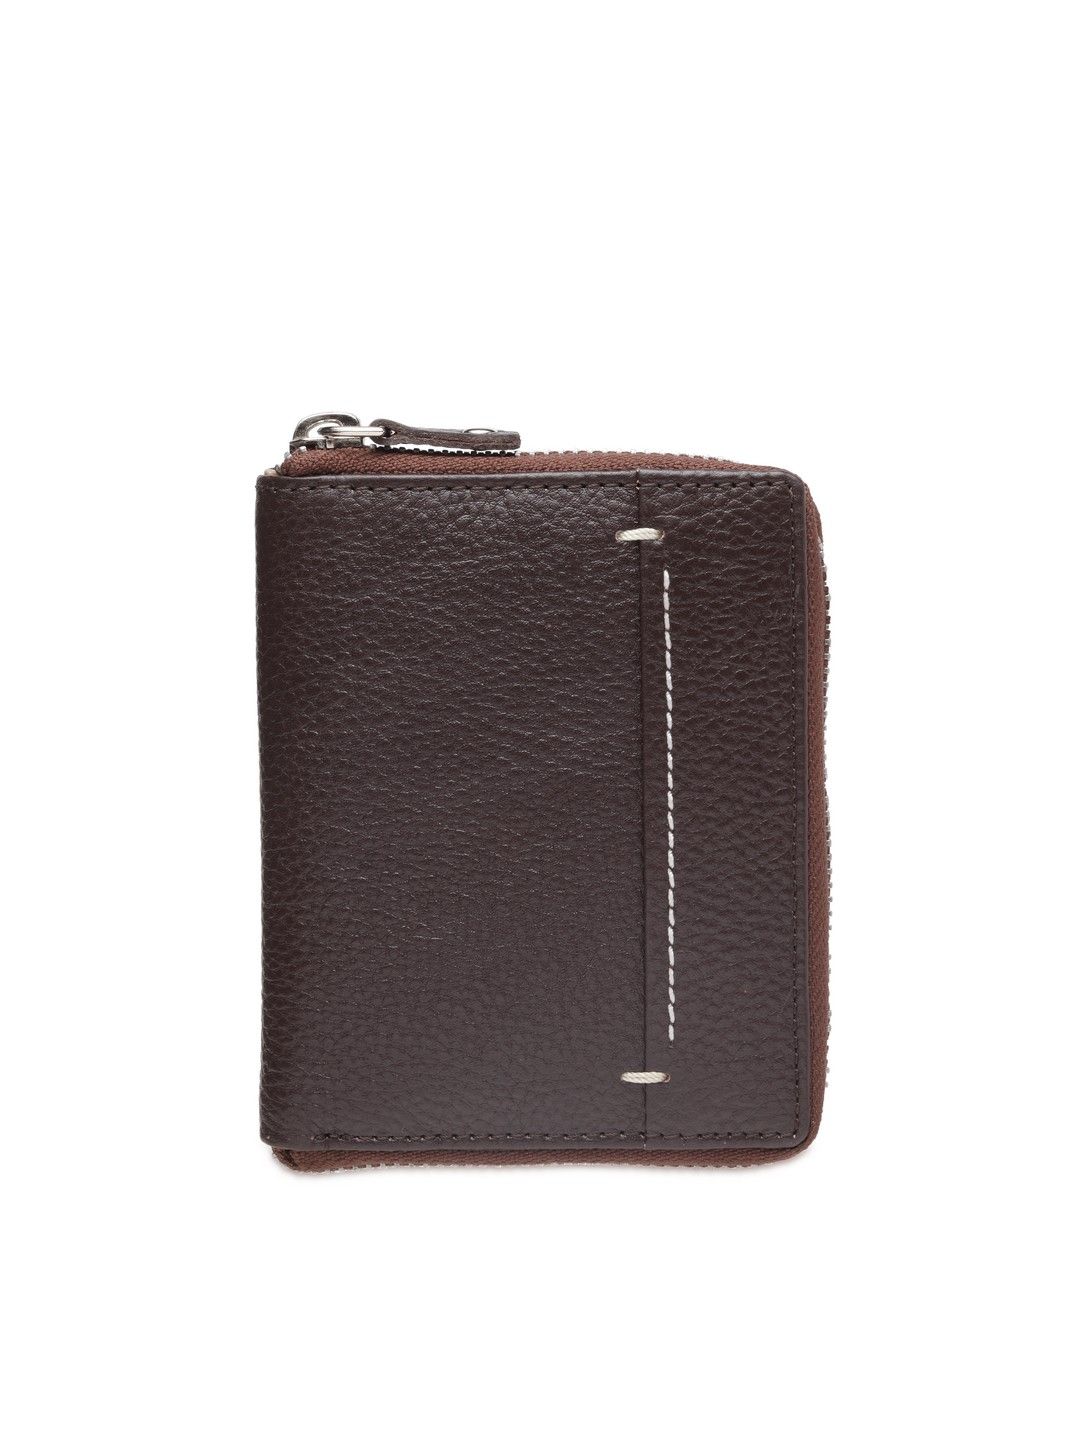 Buy or send Leatherano Amazing Looking Light Brown Color Purse for Men  Online